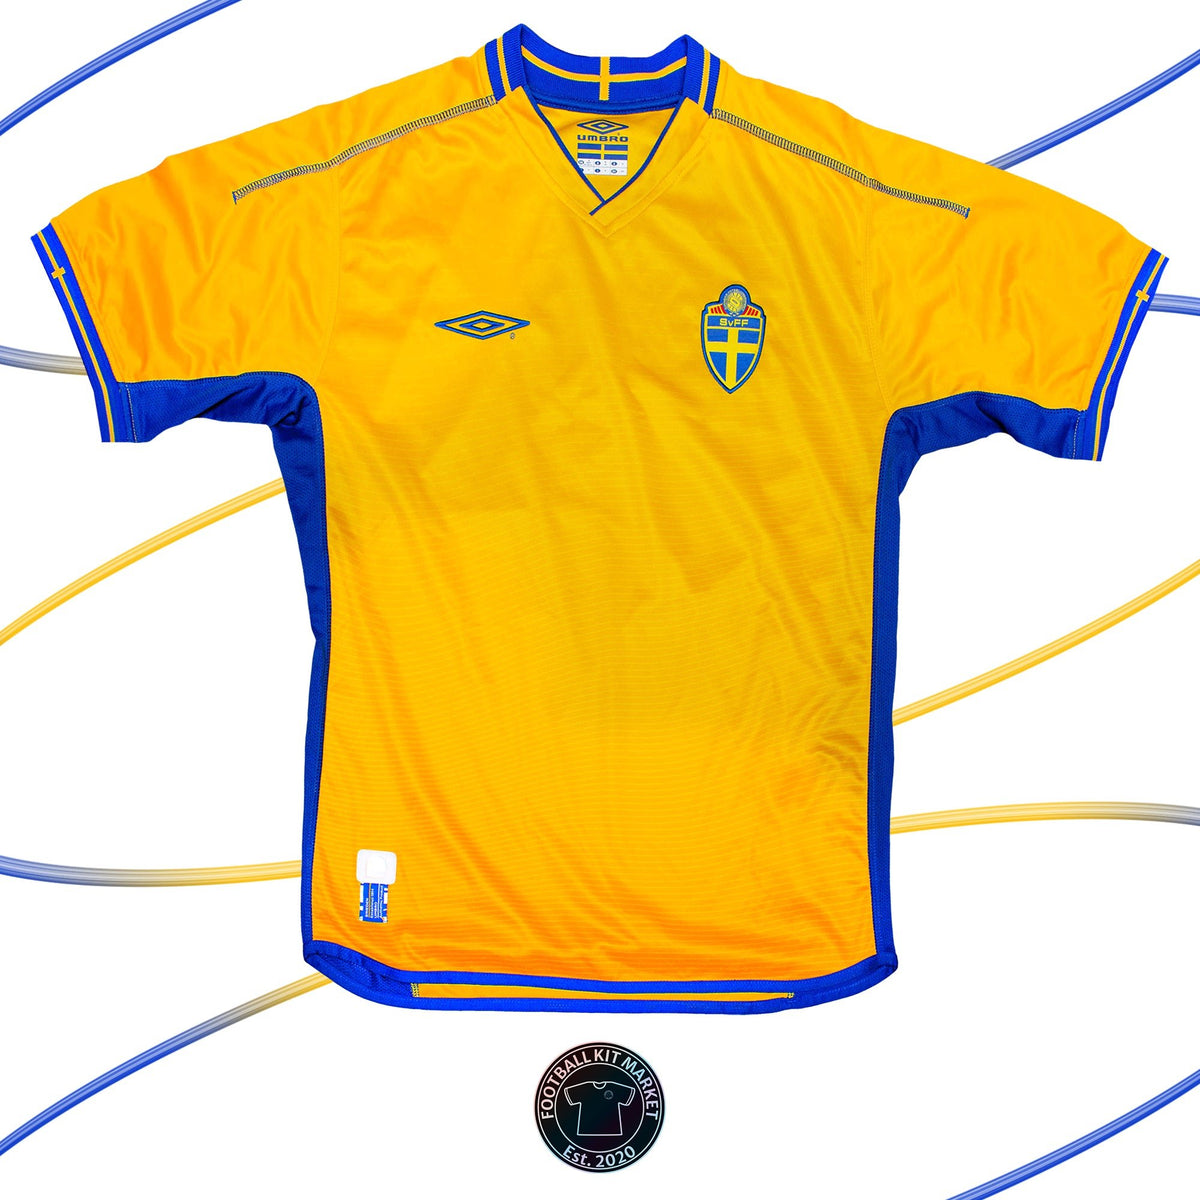 Genuine SWEDEN Home (2003-2005) - UMBRO (M) - Product Image from Football Kit Market